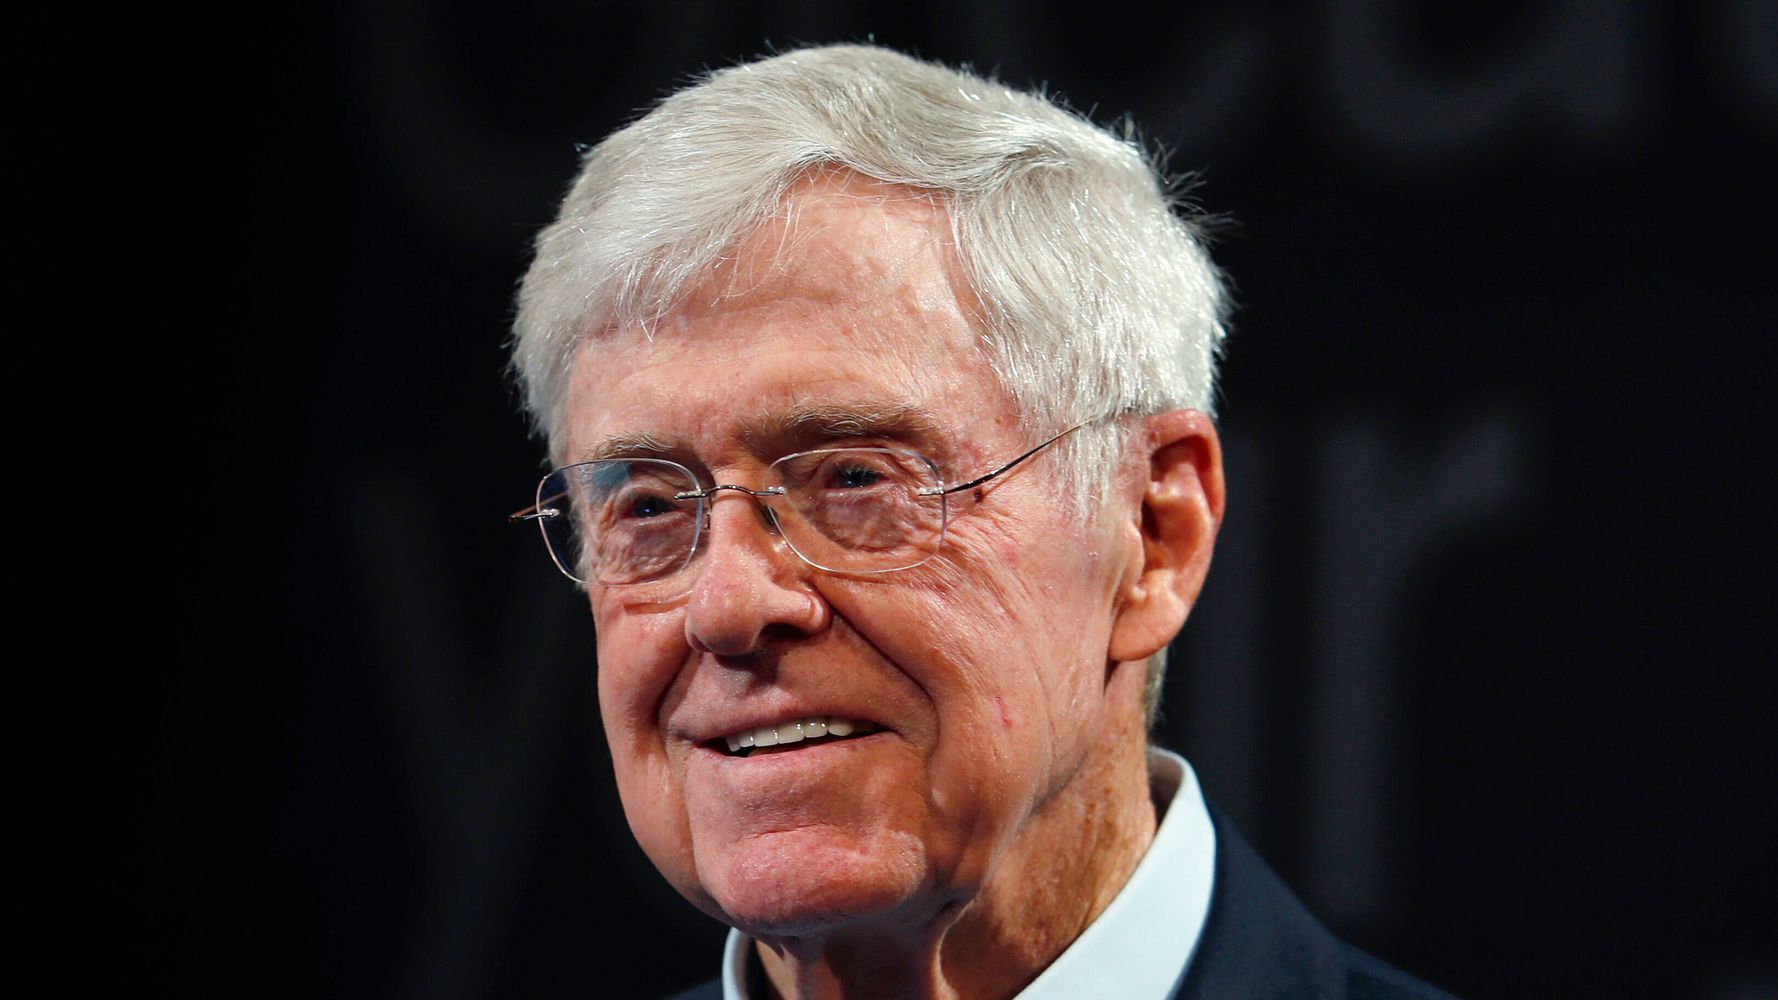 Koch Industries To Stay In Russia, Defying Zelenskyy's Calls For Isolation